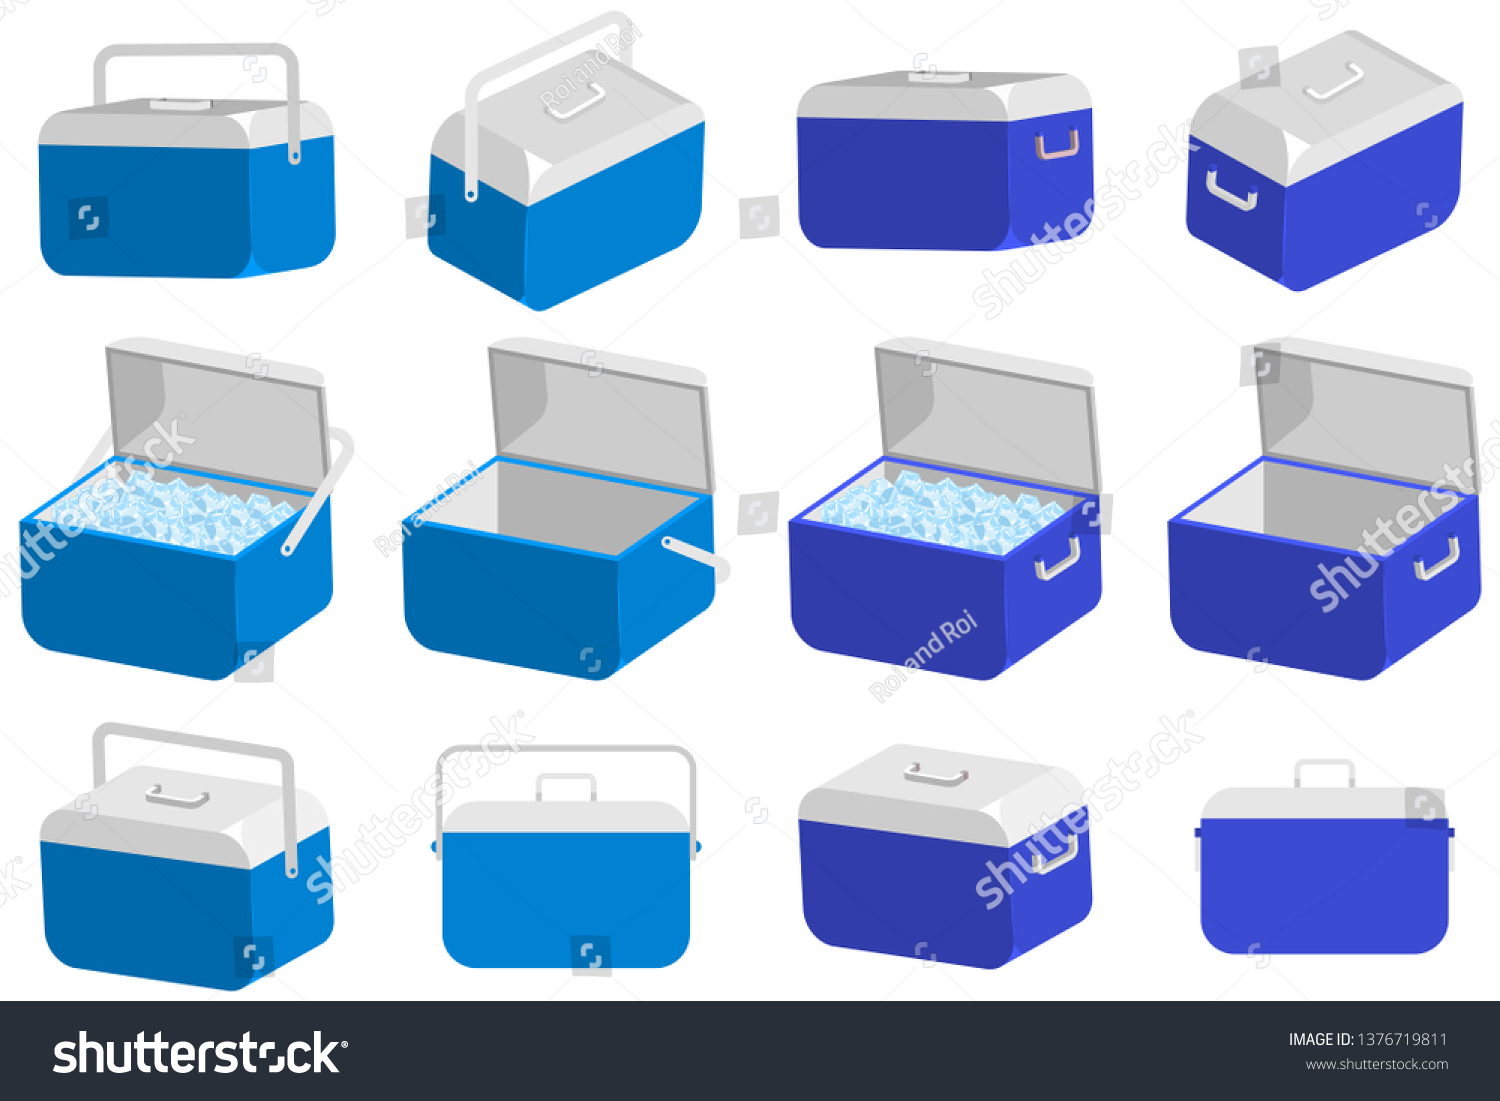 SVG of Ice cooler box vector cartoon set. Handheld camping refrigerator illustration isolated on a white background. svg